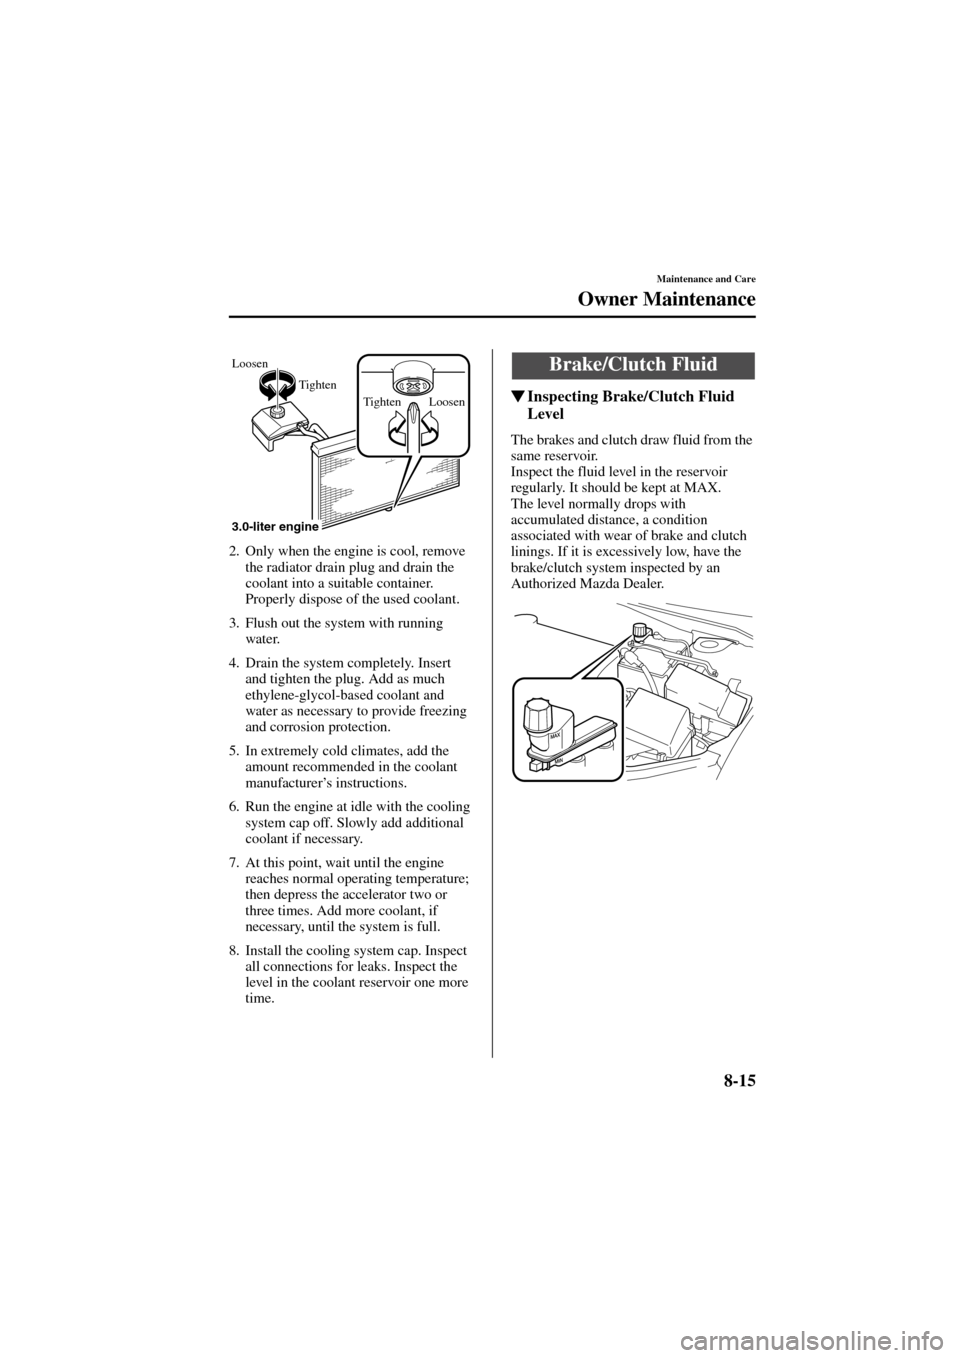 MAZDA MODEL 6 2004   (in English) Owners Manual 8-15
Maintenance and Care
Owner Maintenance
Form No. 8R29-EA-02I
2. Only when the engine is cool, remove 
the radiator drain plug and drain the 
coolant into a suitable container. 
Properly dispose of